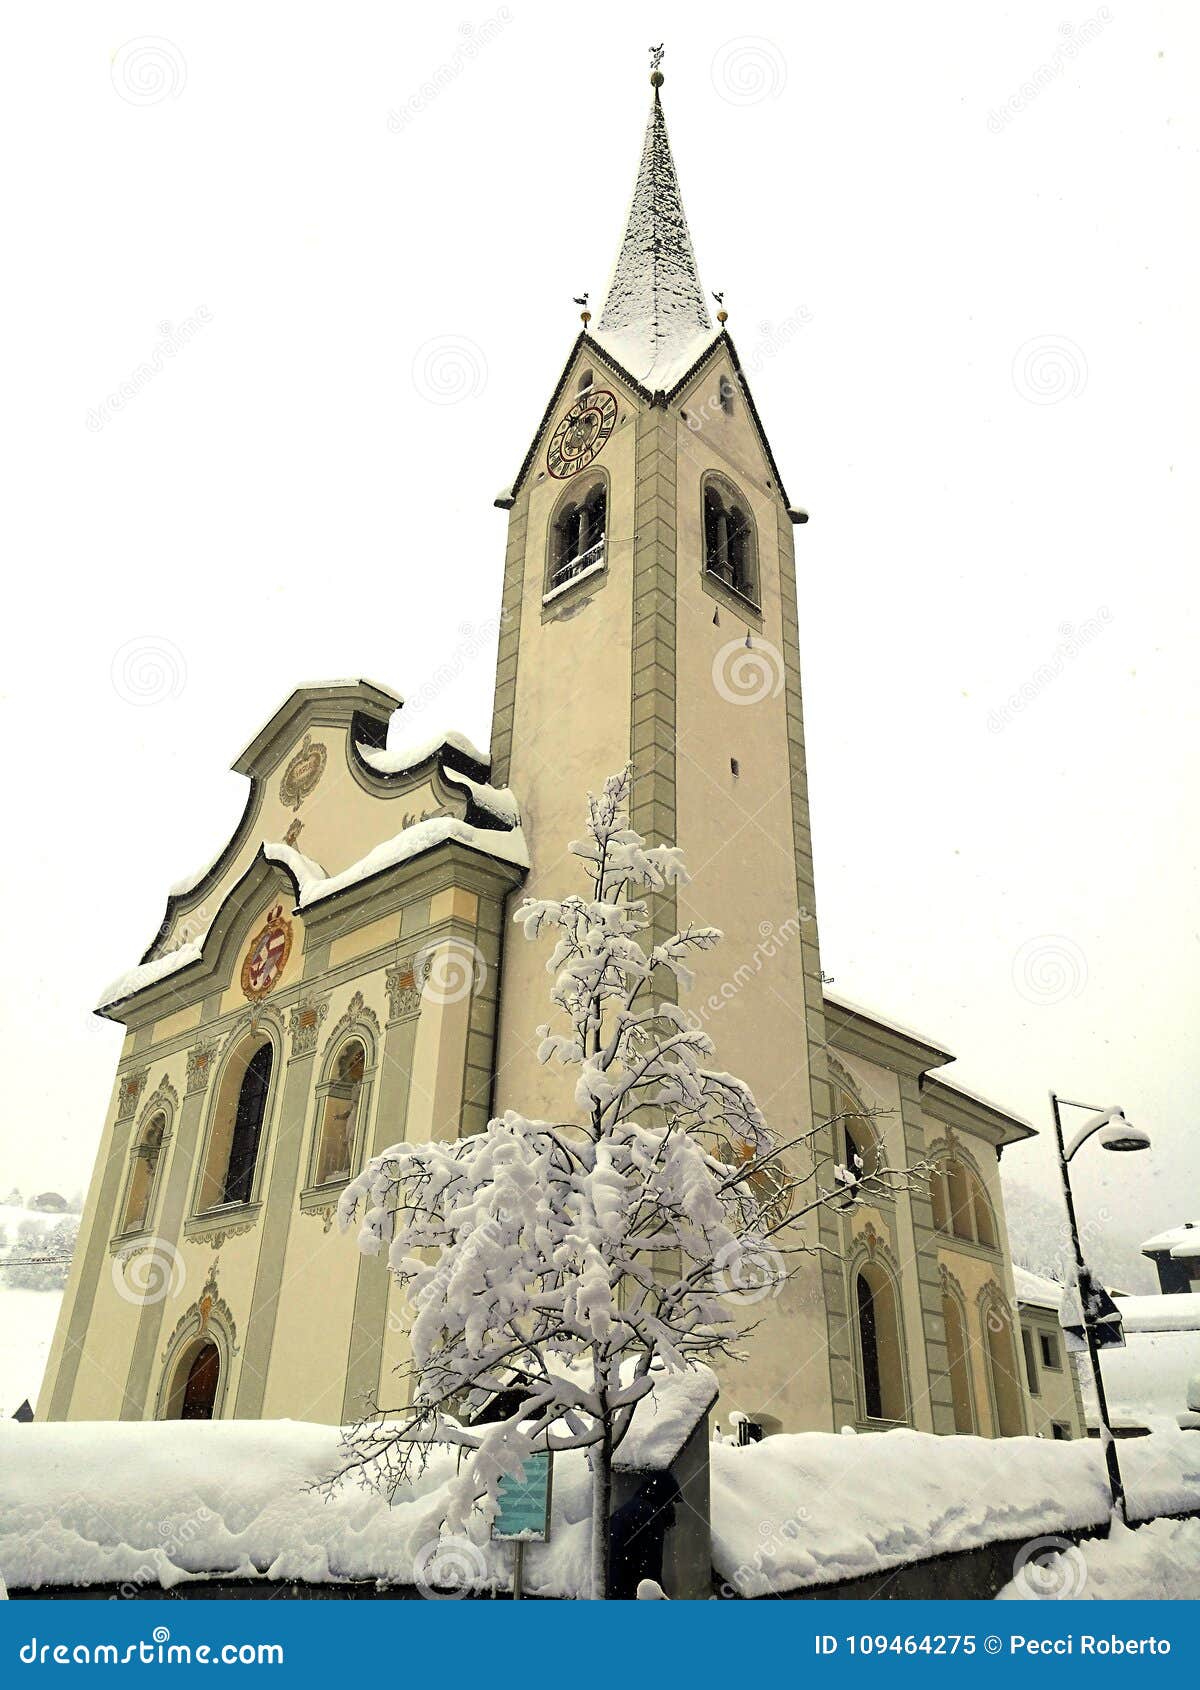 italy, trentino alto adige, bolzano, san vigilio di marebbe, view of the church of the town during a winter day and during a snowf